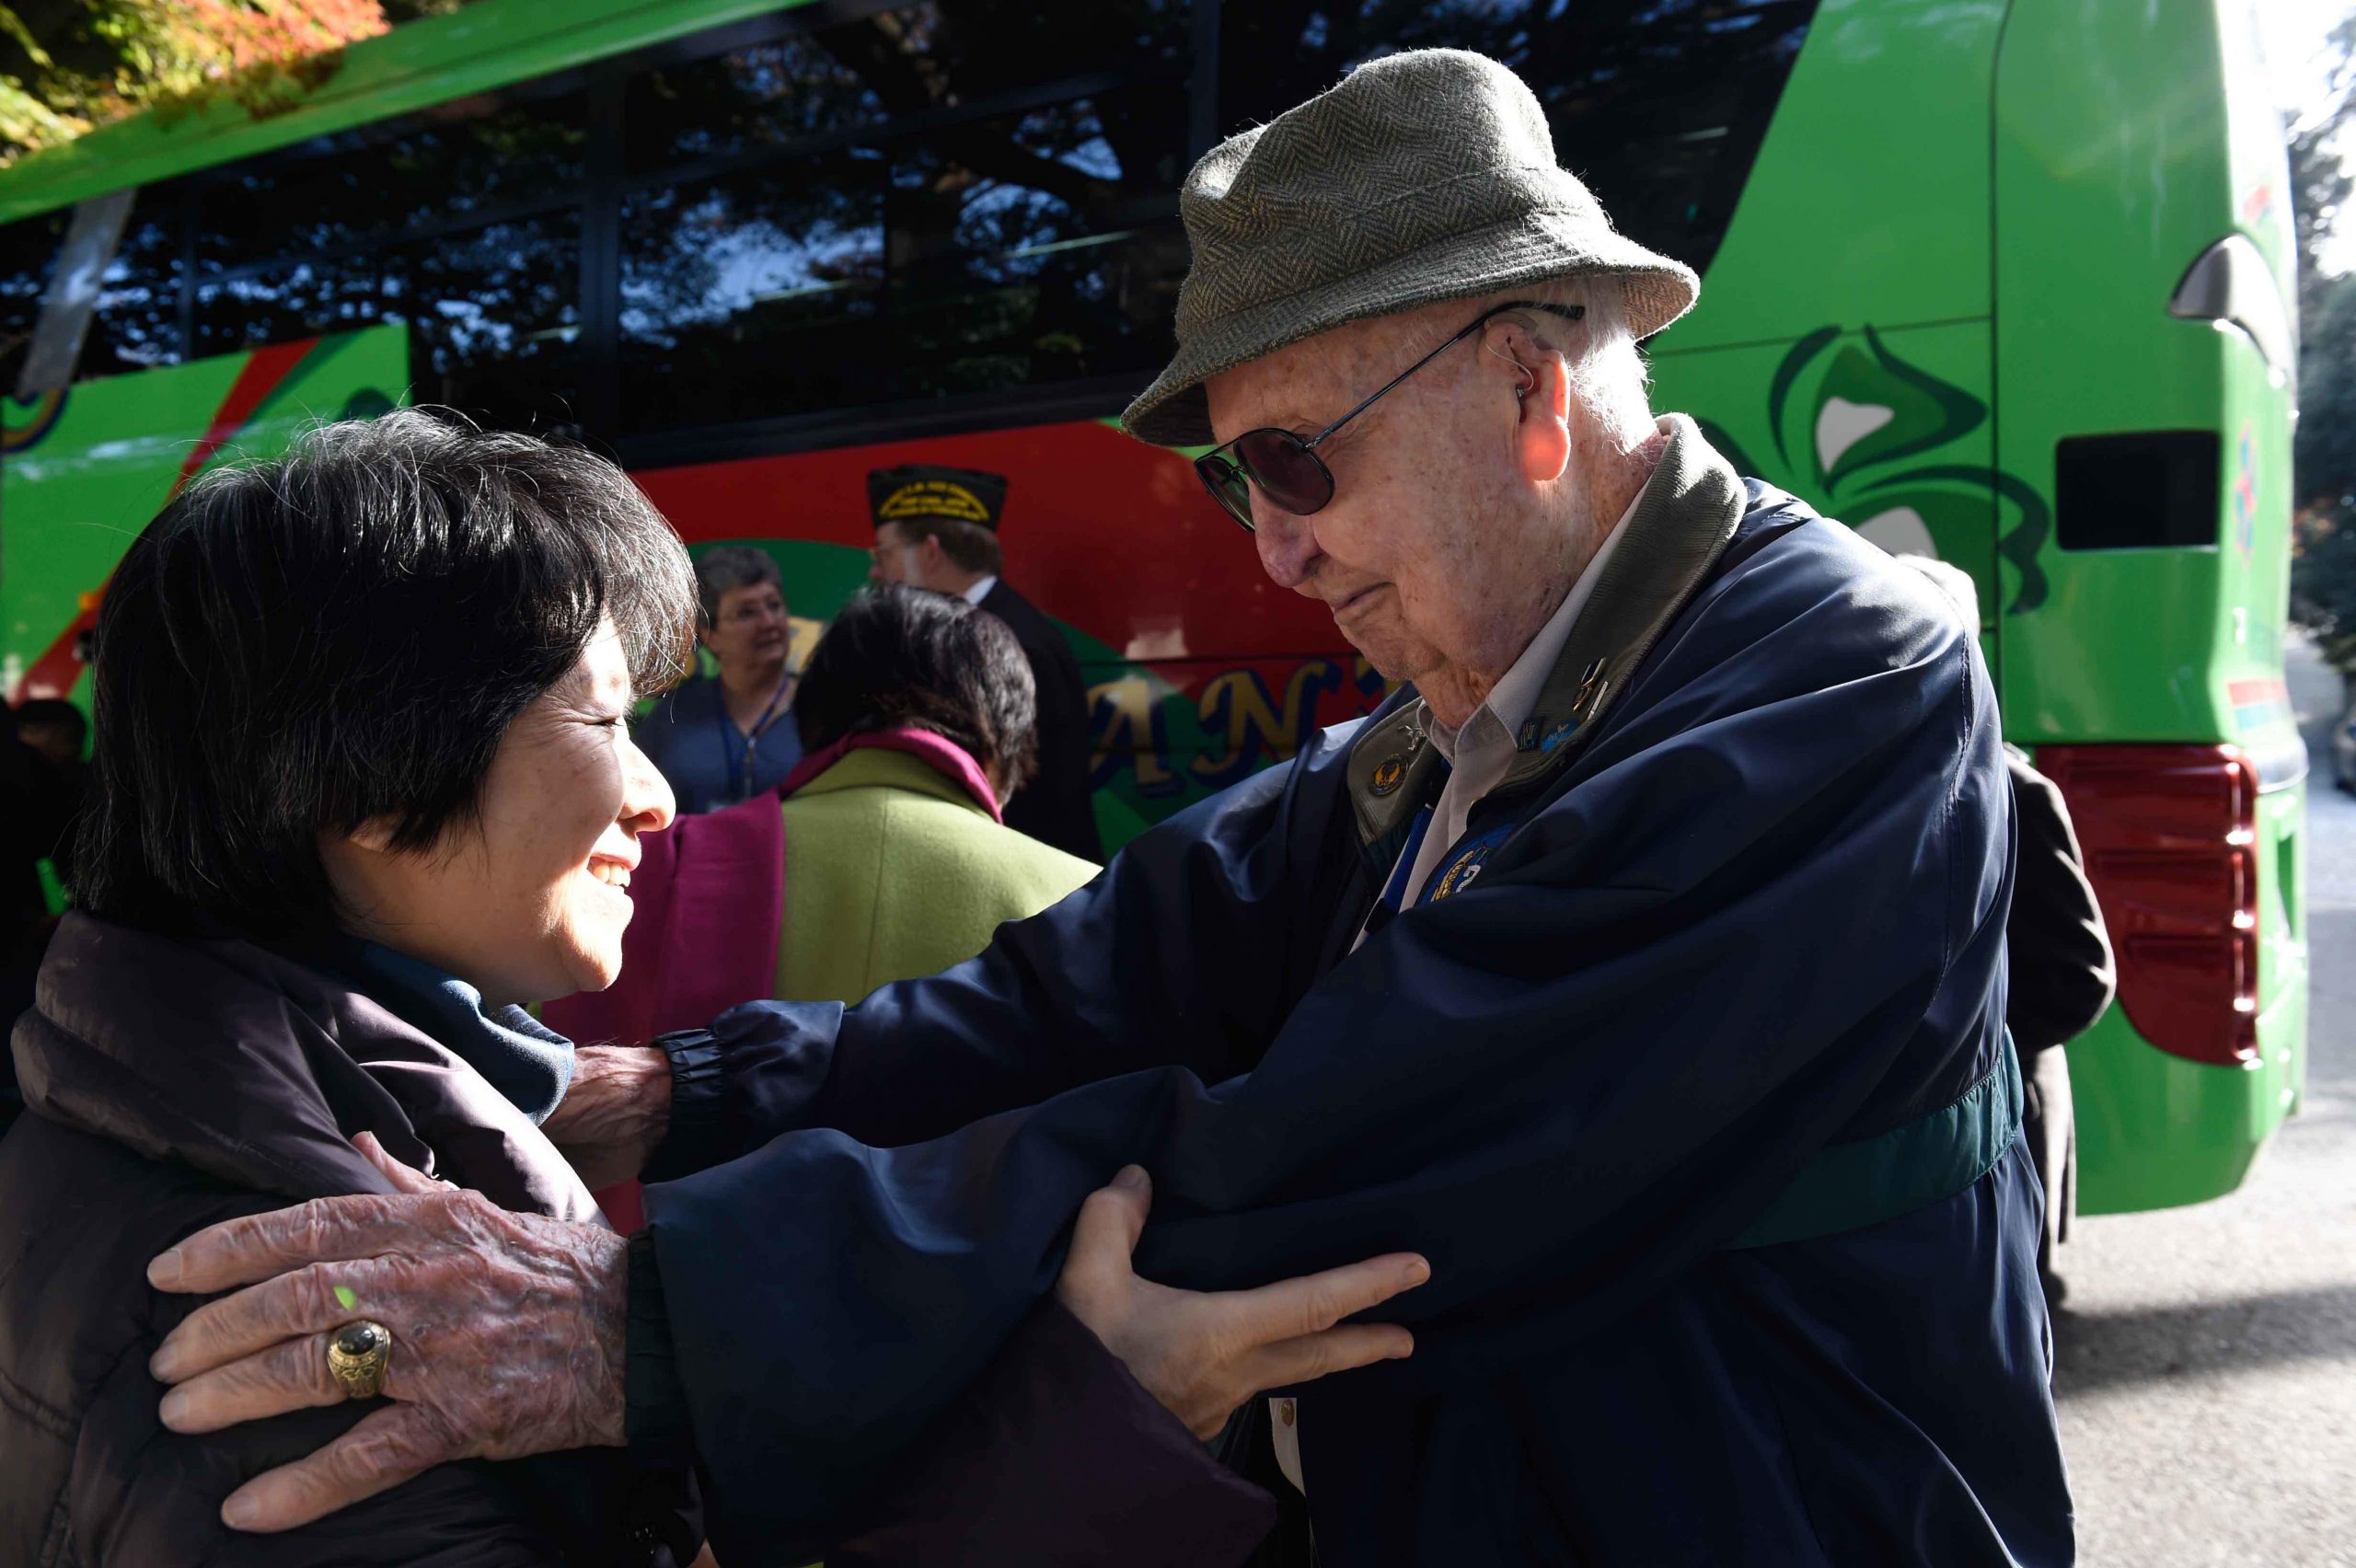 151207-N-IE405-265 HODOGAYA, Japan (Dec. 7, 2015) A Japanese woman embraces former prisoner of war Fiske Hanley at the sixth annual Japanese/ POW(s) Friendship Program. The Japanese government sponsored several former U.S. POWs' trip to Japan as a peacefu